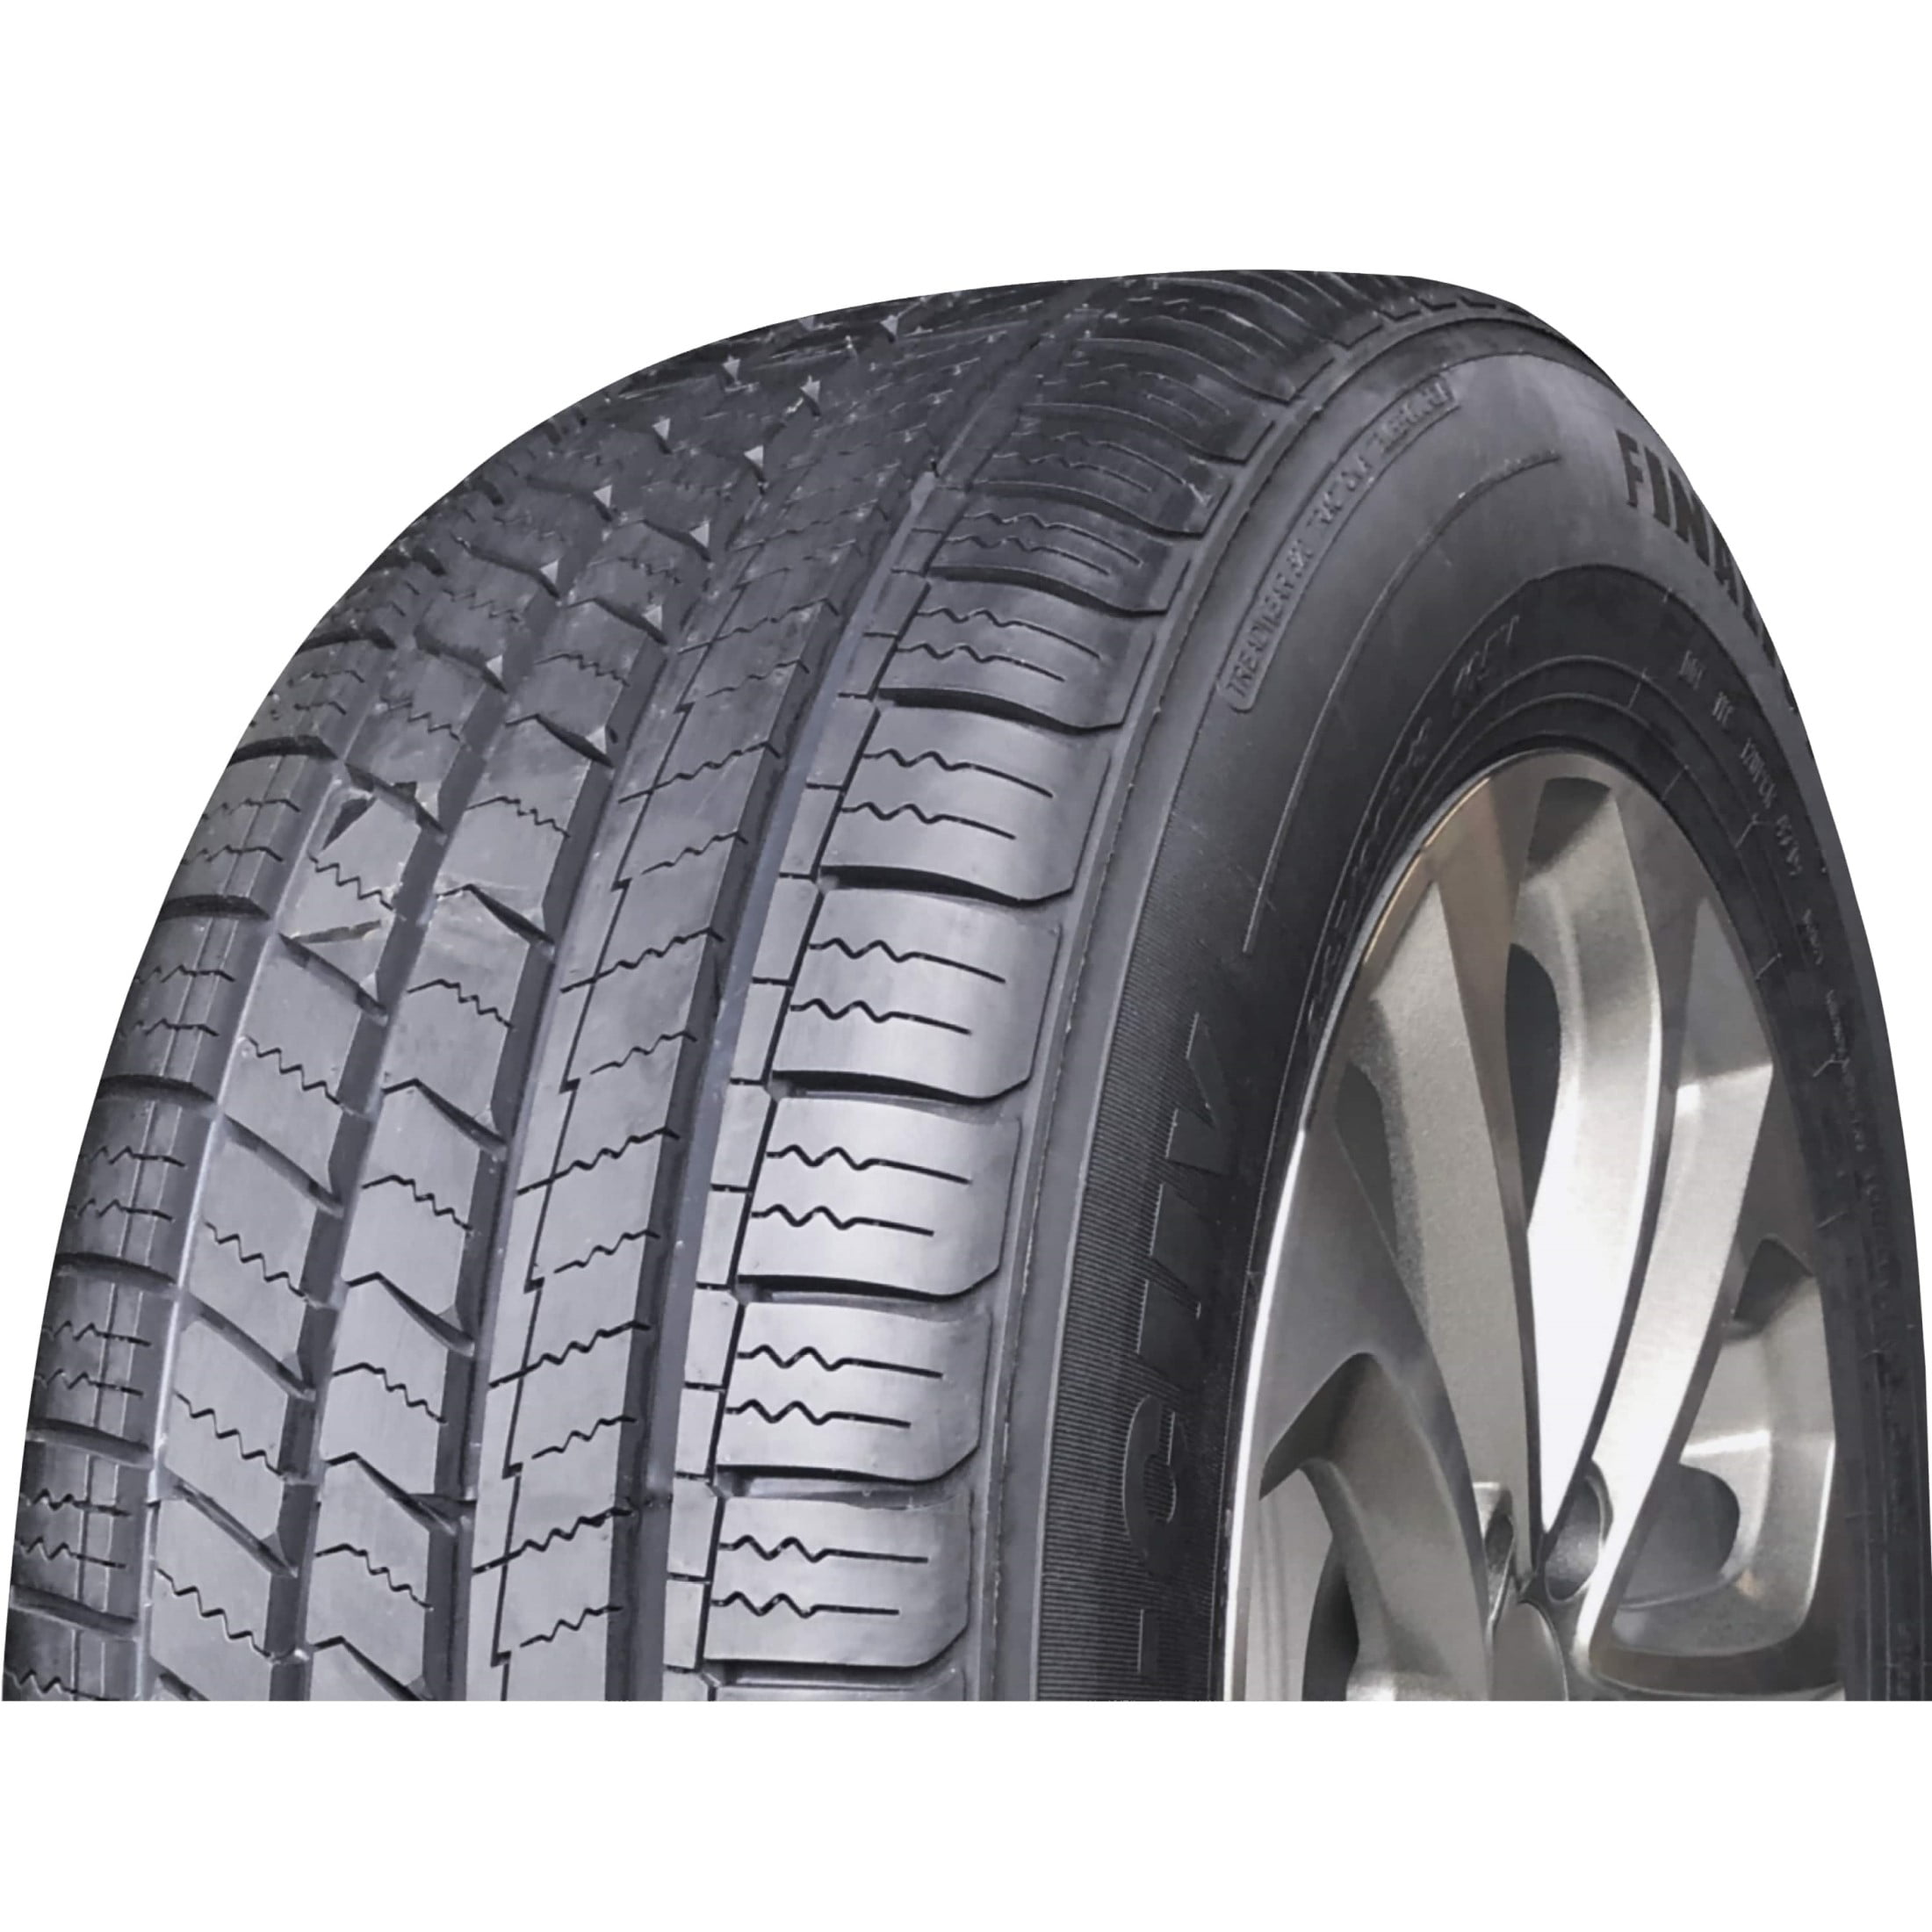 Finalist UN-CUV 235/65R17 A/S Season Only) Load Performance XL High SUV All Extra CUV 235/65/17 Tire 108V (Tire